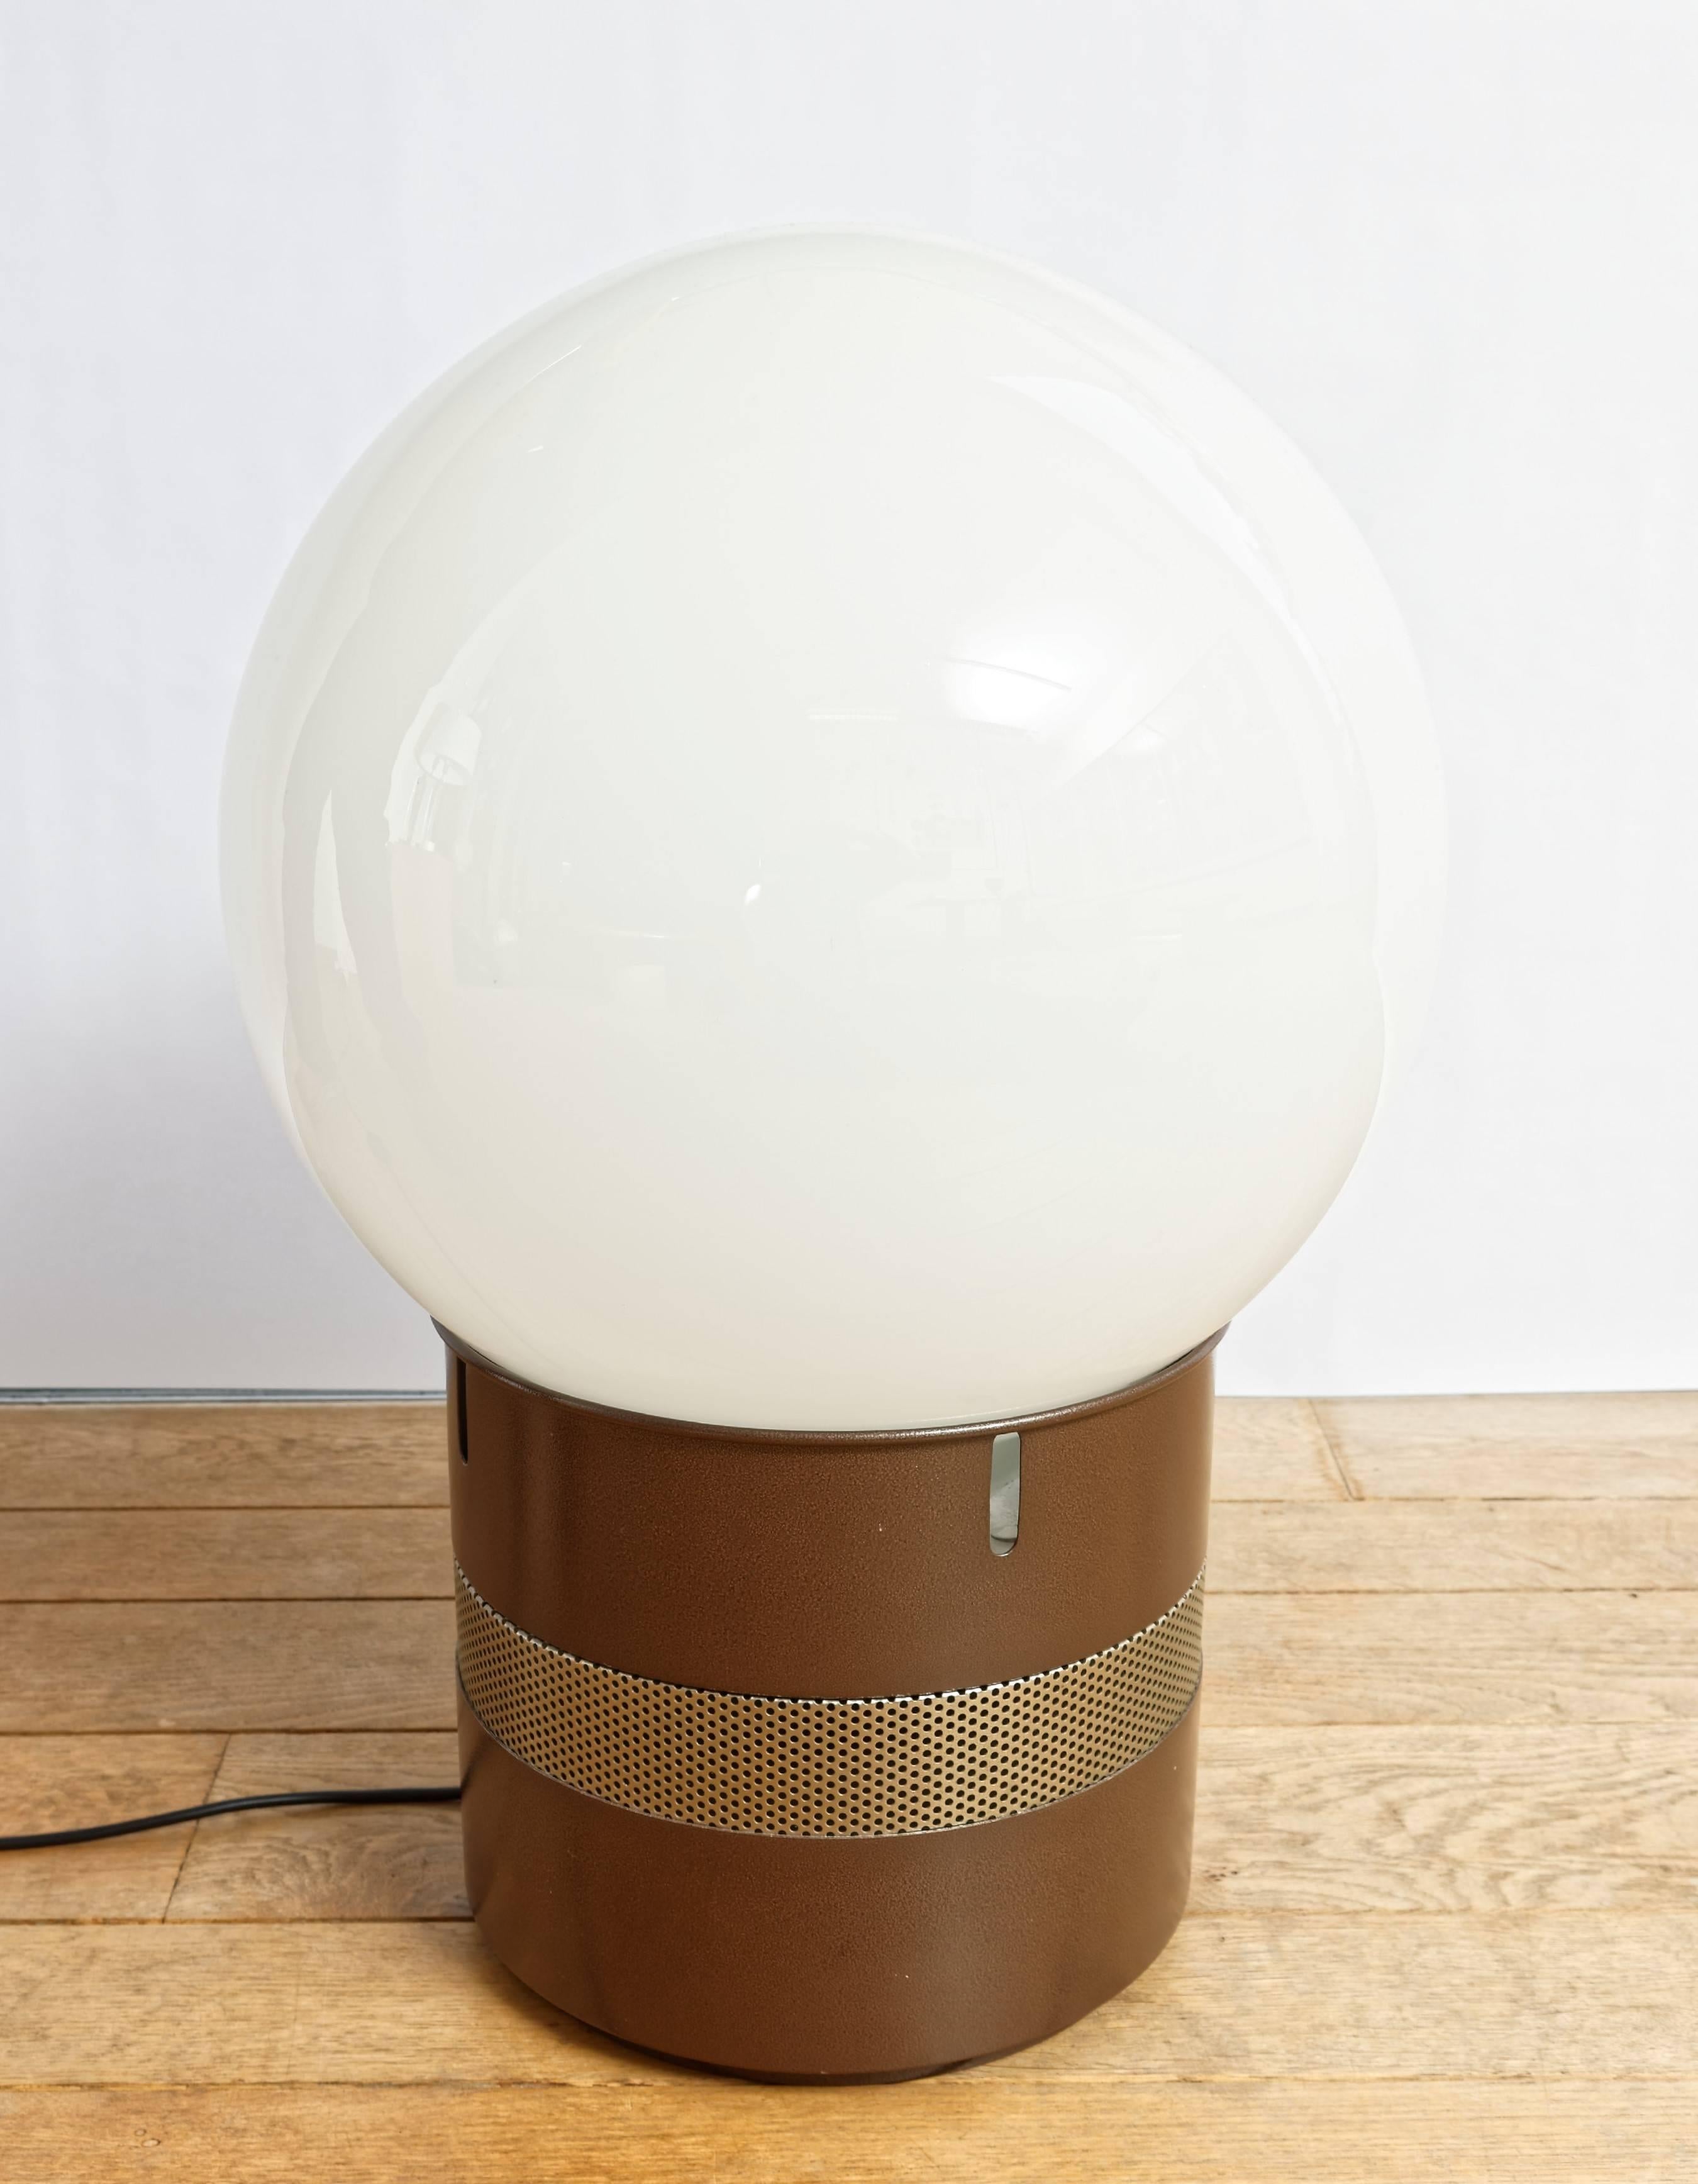 'Mezzoracolo' table or floor lamp by the Italian architect Gae Aulenti (1927-2012) and executed by Artemide, Italy.
Three light bulbs (one inside the white glass ball and two inside the base/foot).